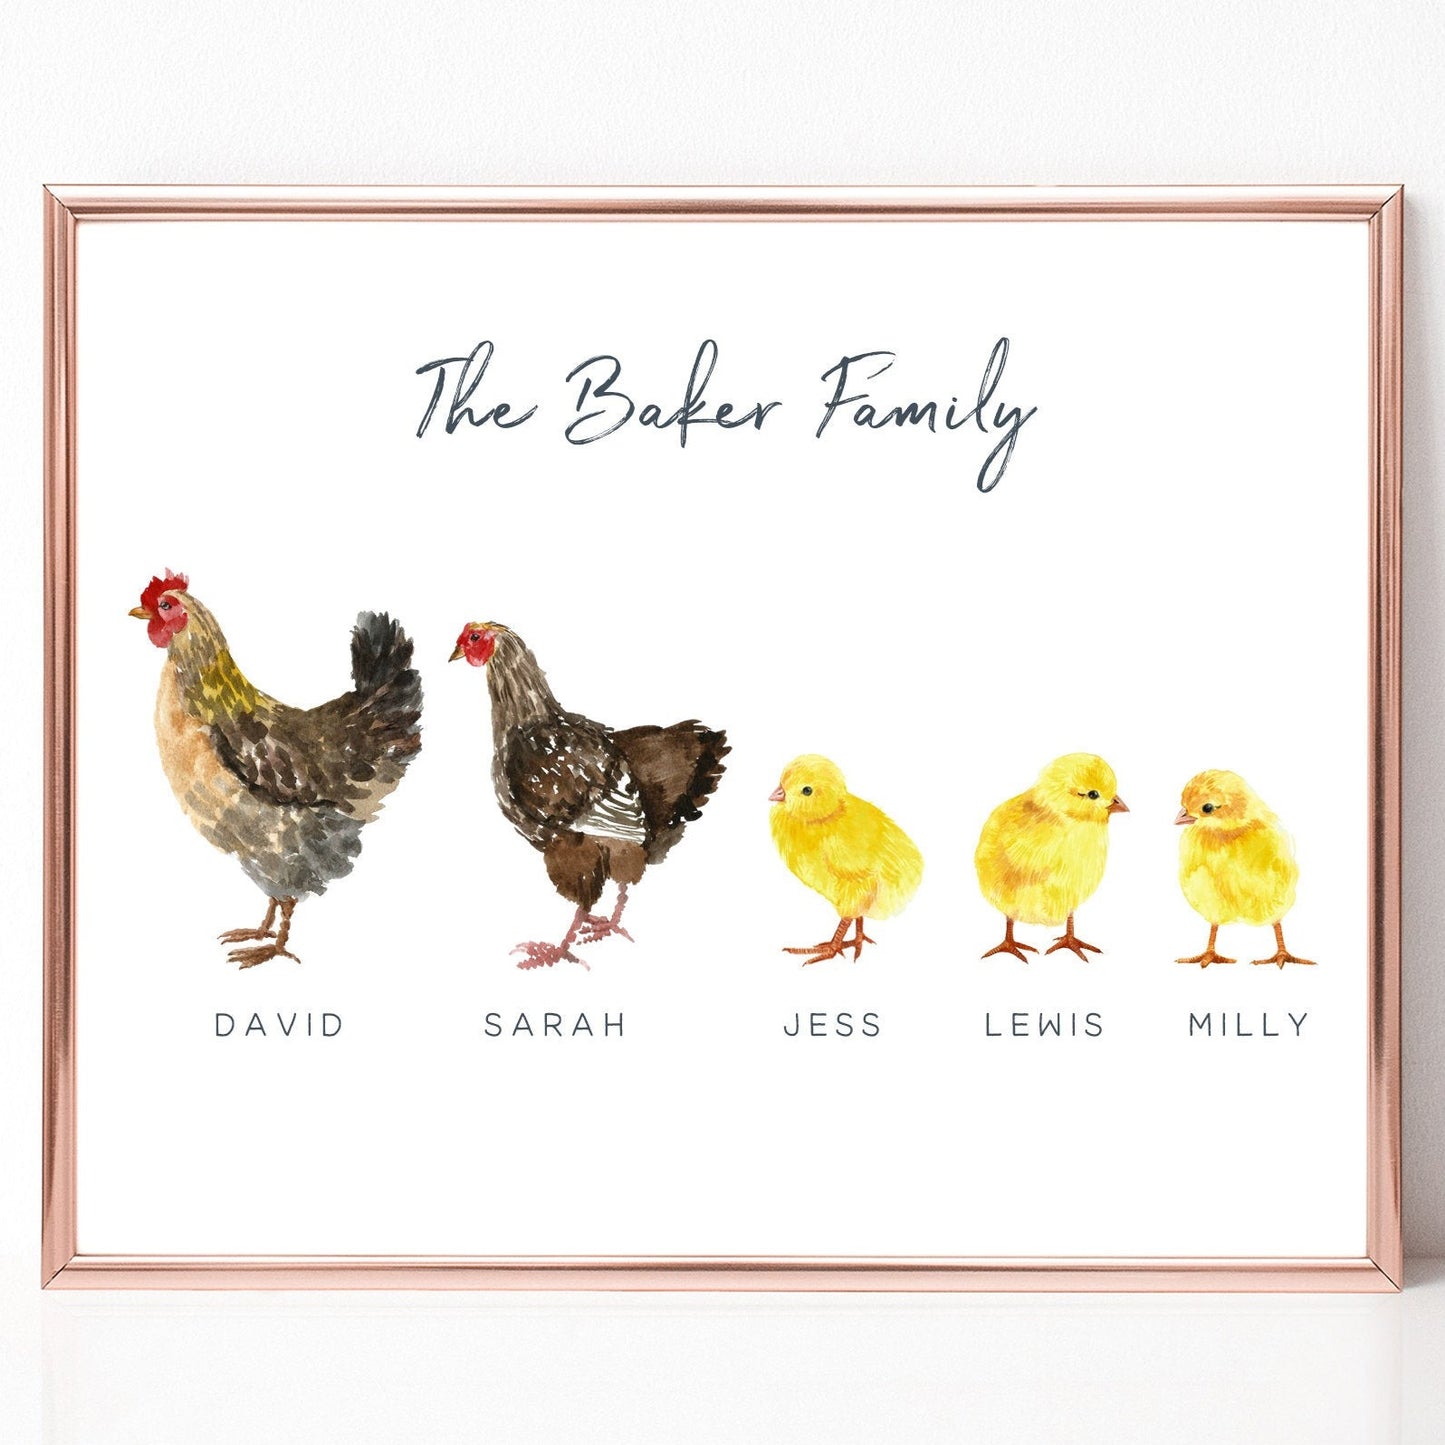 watercolour chickens chicks family print personalised with names unframed matte paperstock